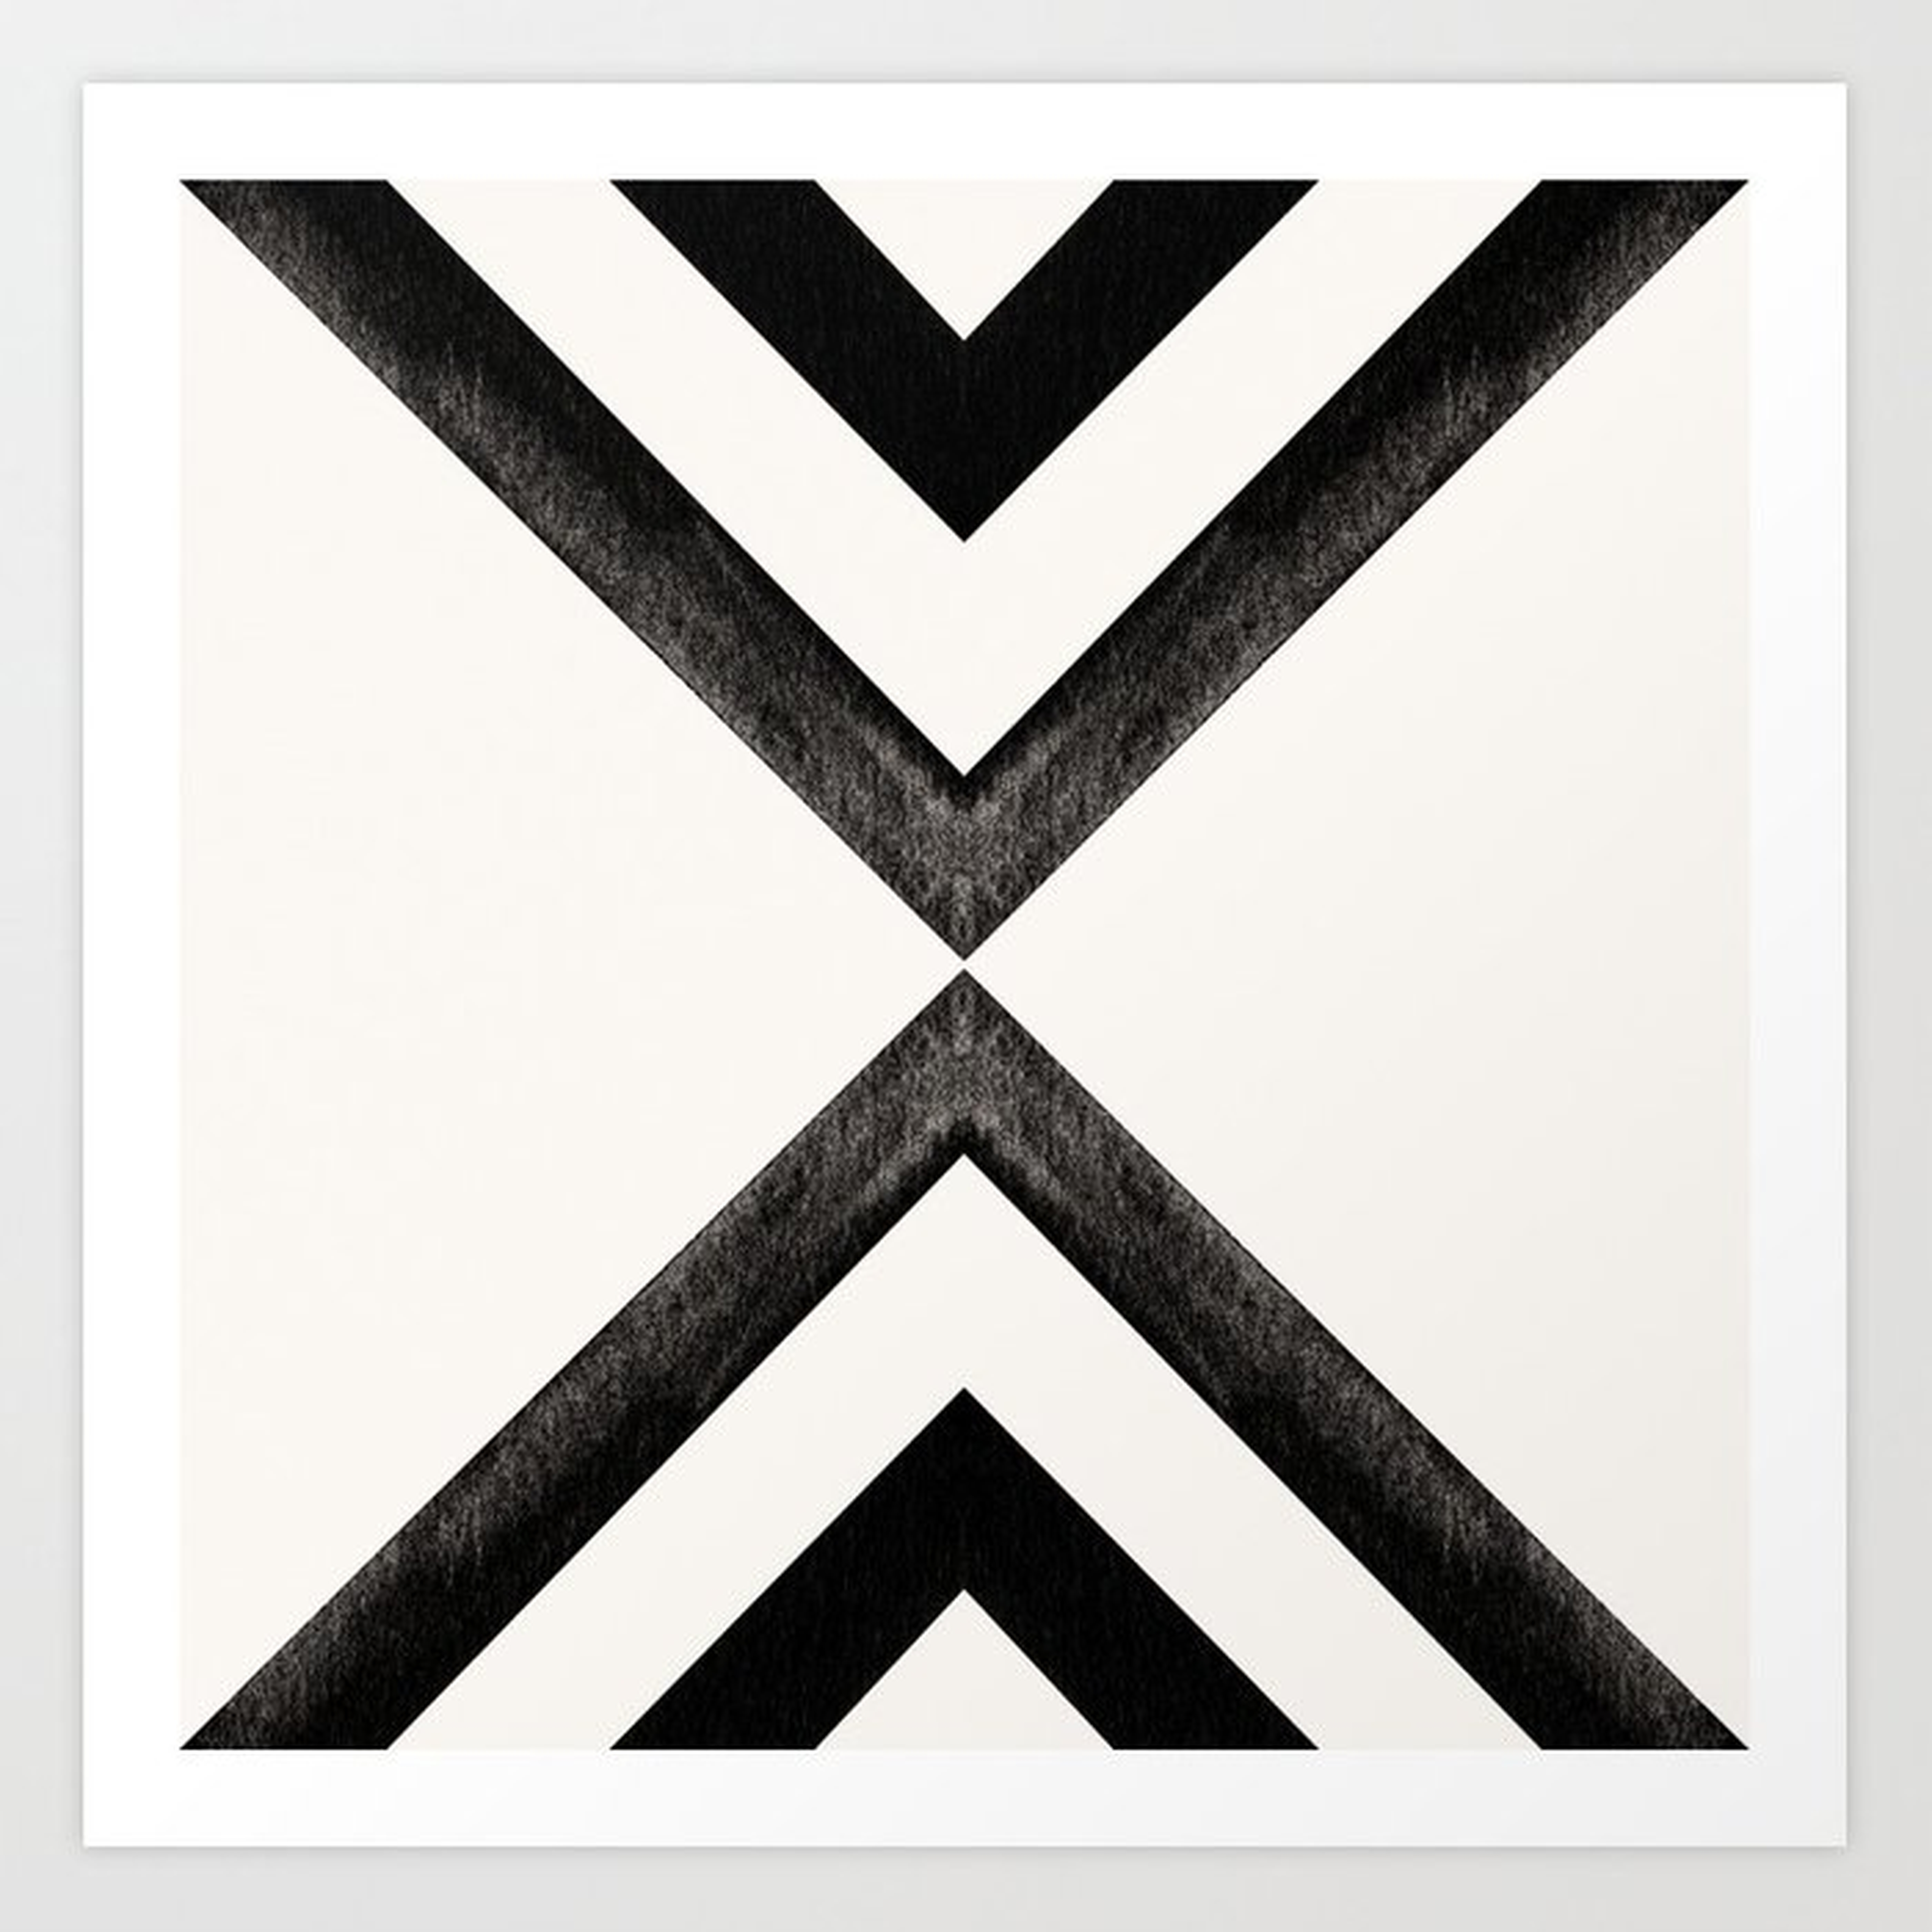 Converging Triangles Black and White print - 8x8 [unframed] - Society6